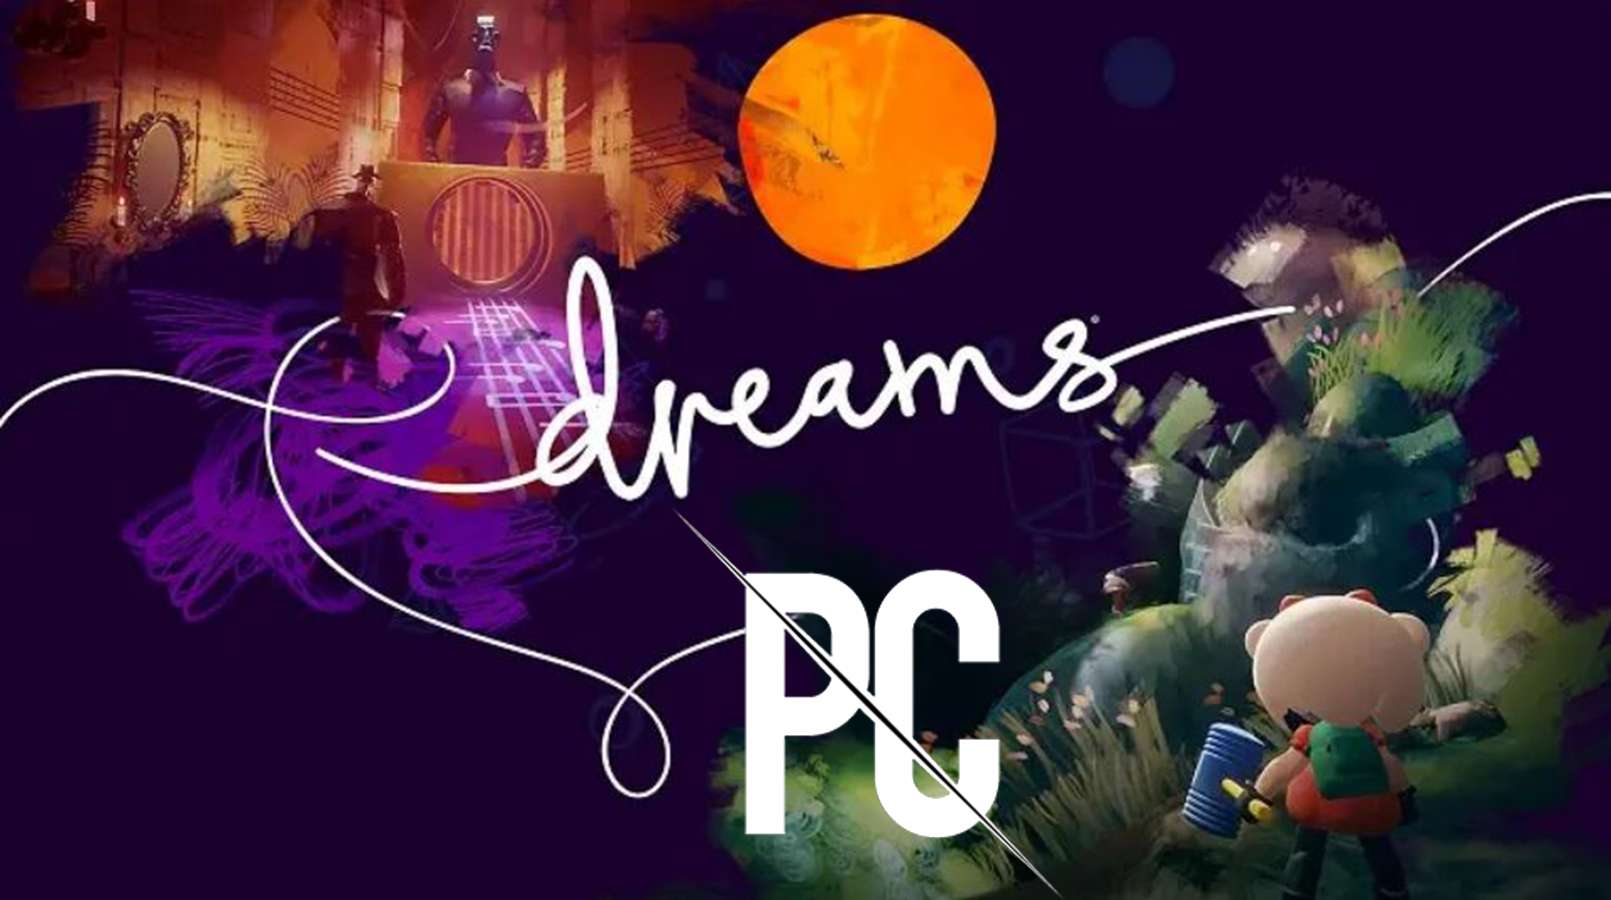 Dreams Creator Regrets Lack Of PC Version, Next Project Is “More Of A Game Than A Creation Tool”